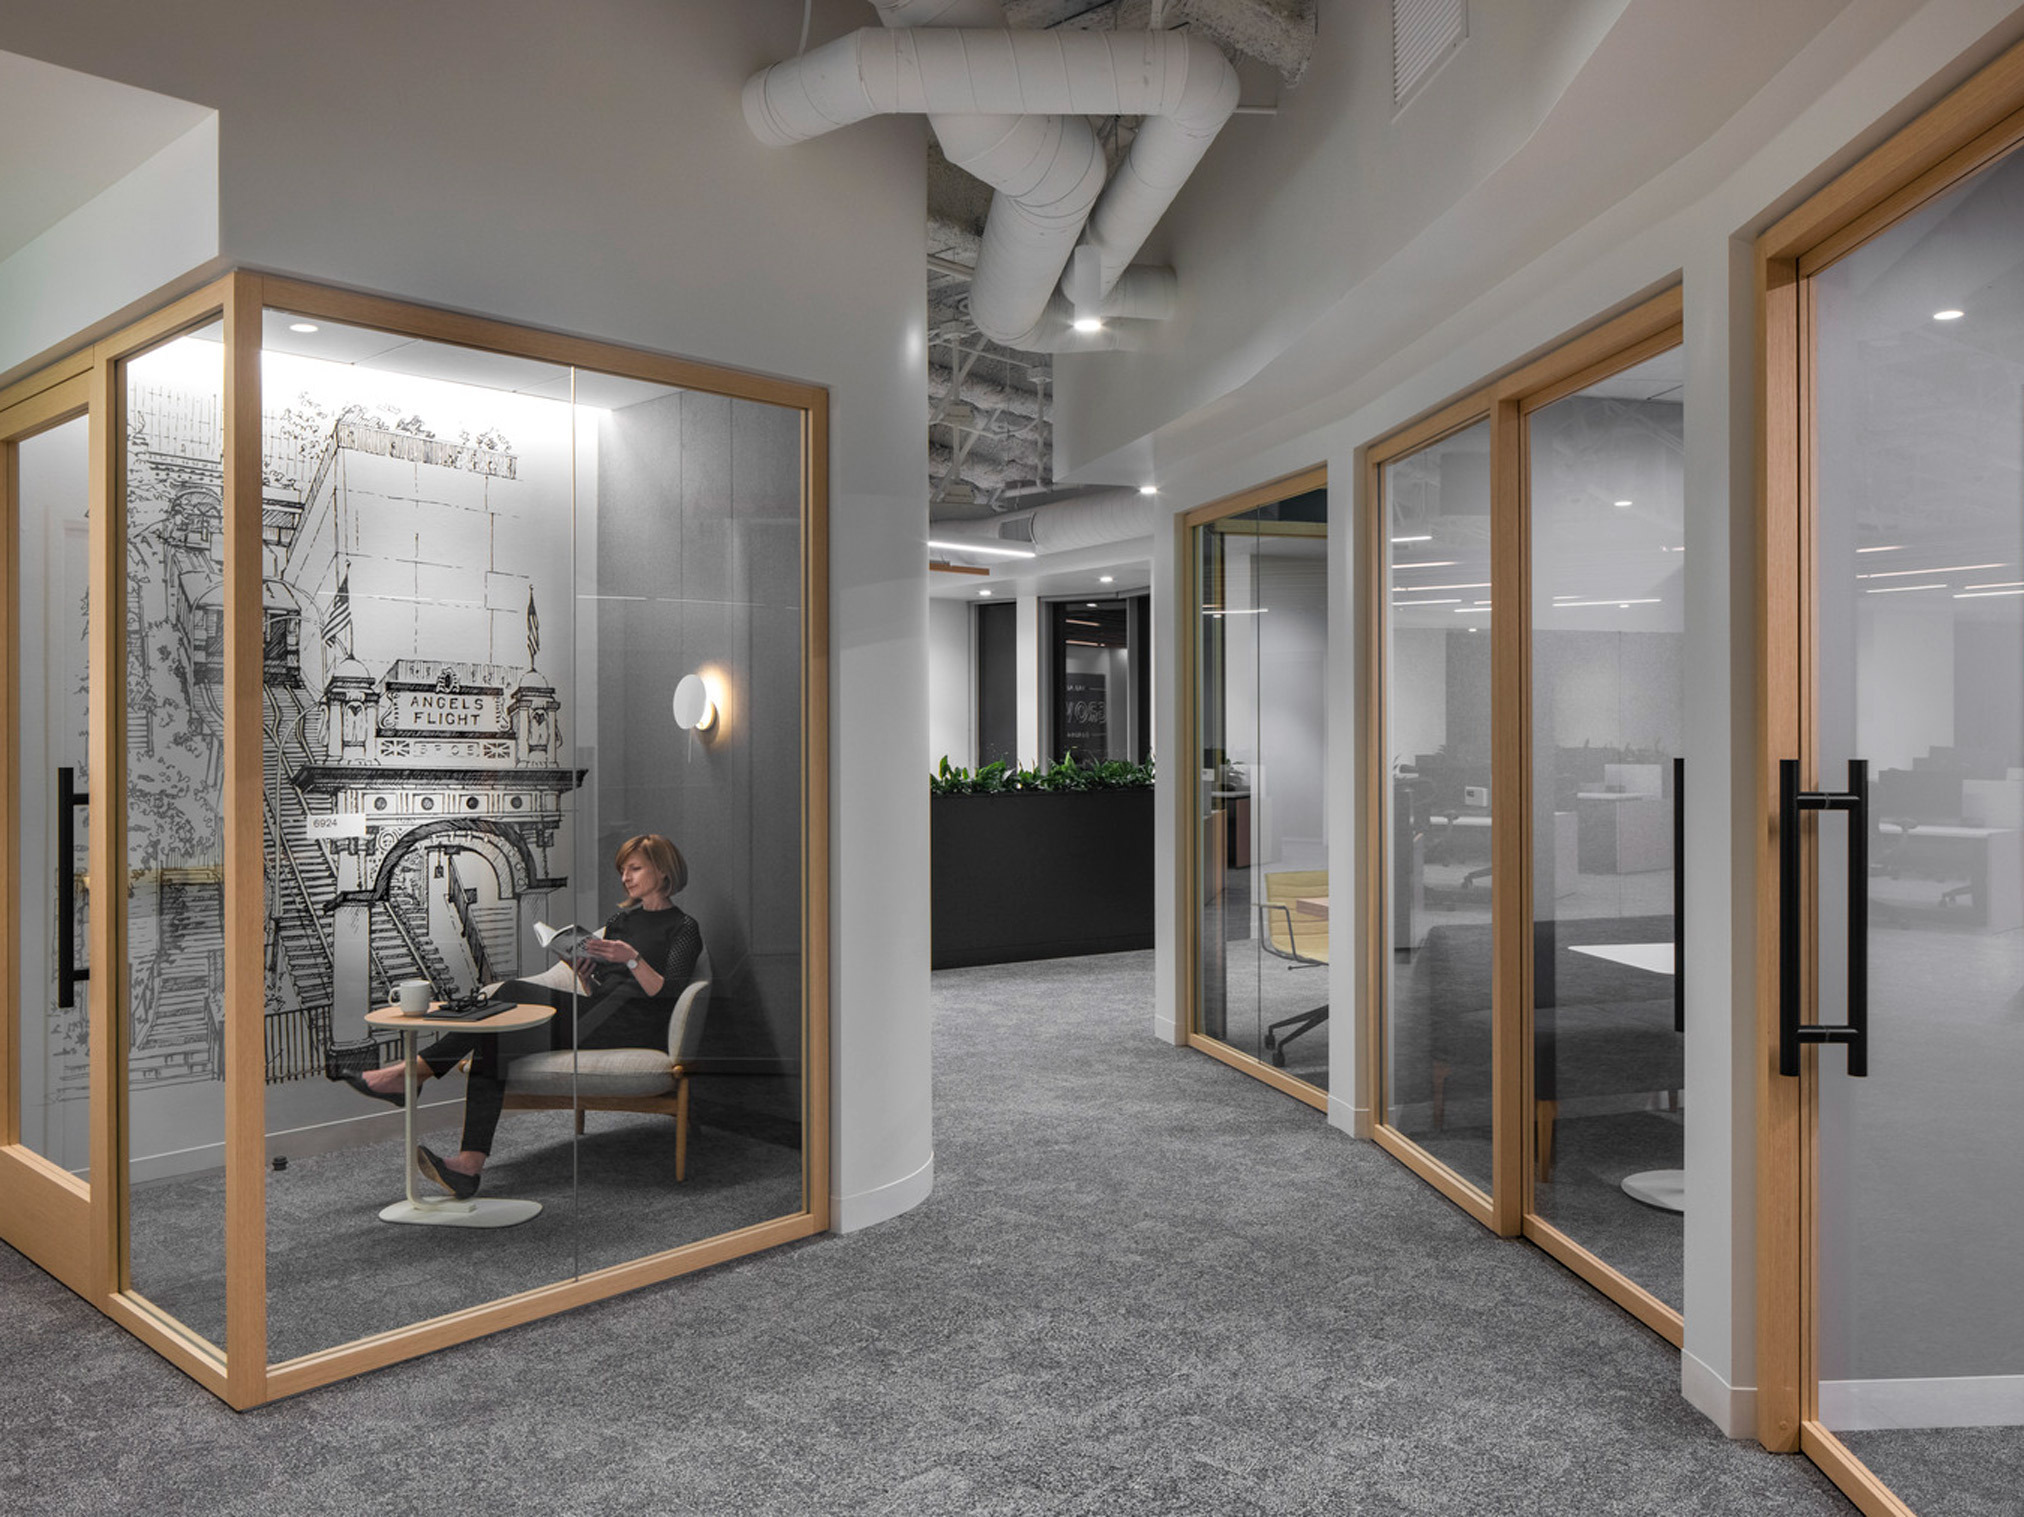 Modern office nook featuring glass walls, wooden door frames, and a monochromatic color scheme. A person sits at a minimalist desk inside, adjacent to a large-scale wall mural, under exposed ceiling infrastructure and soft pendant lighting.